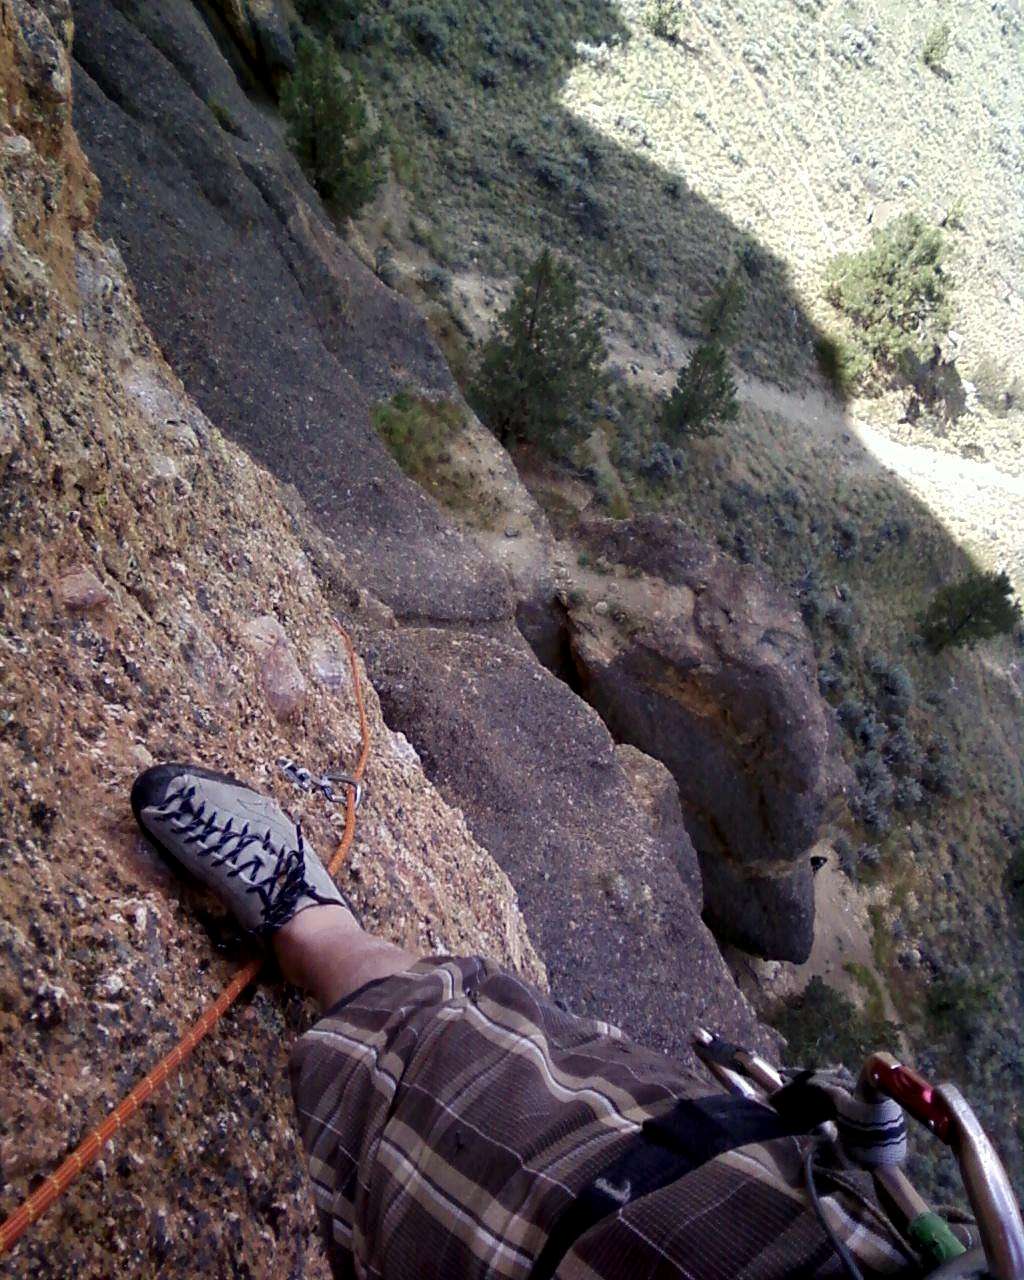 about halfway up pitch 3